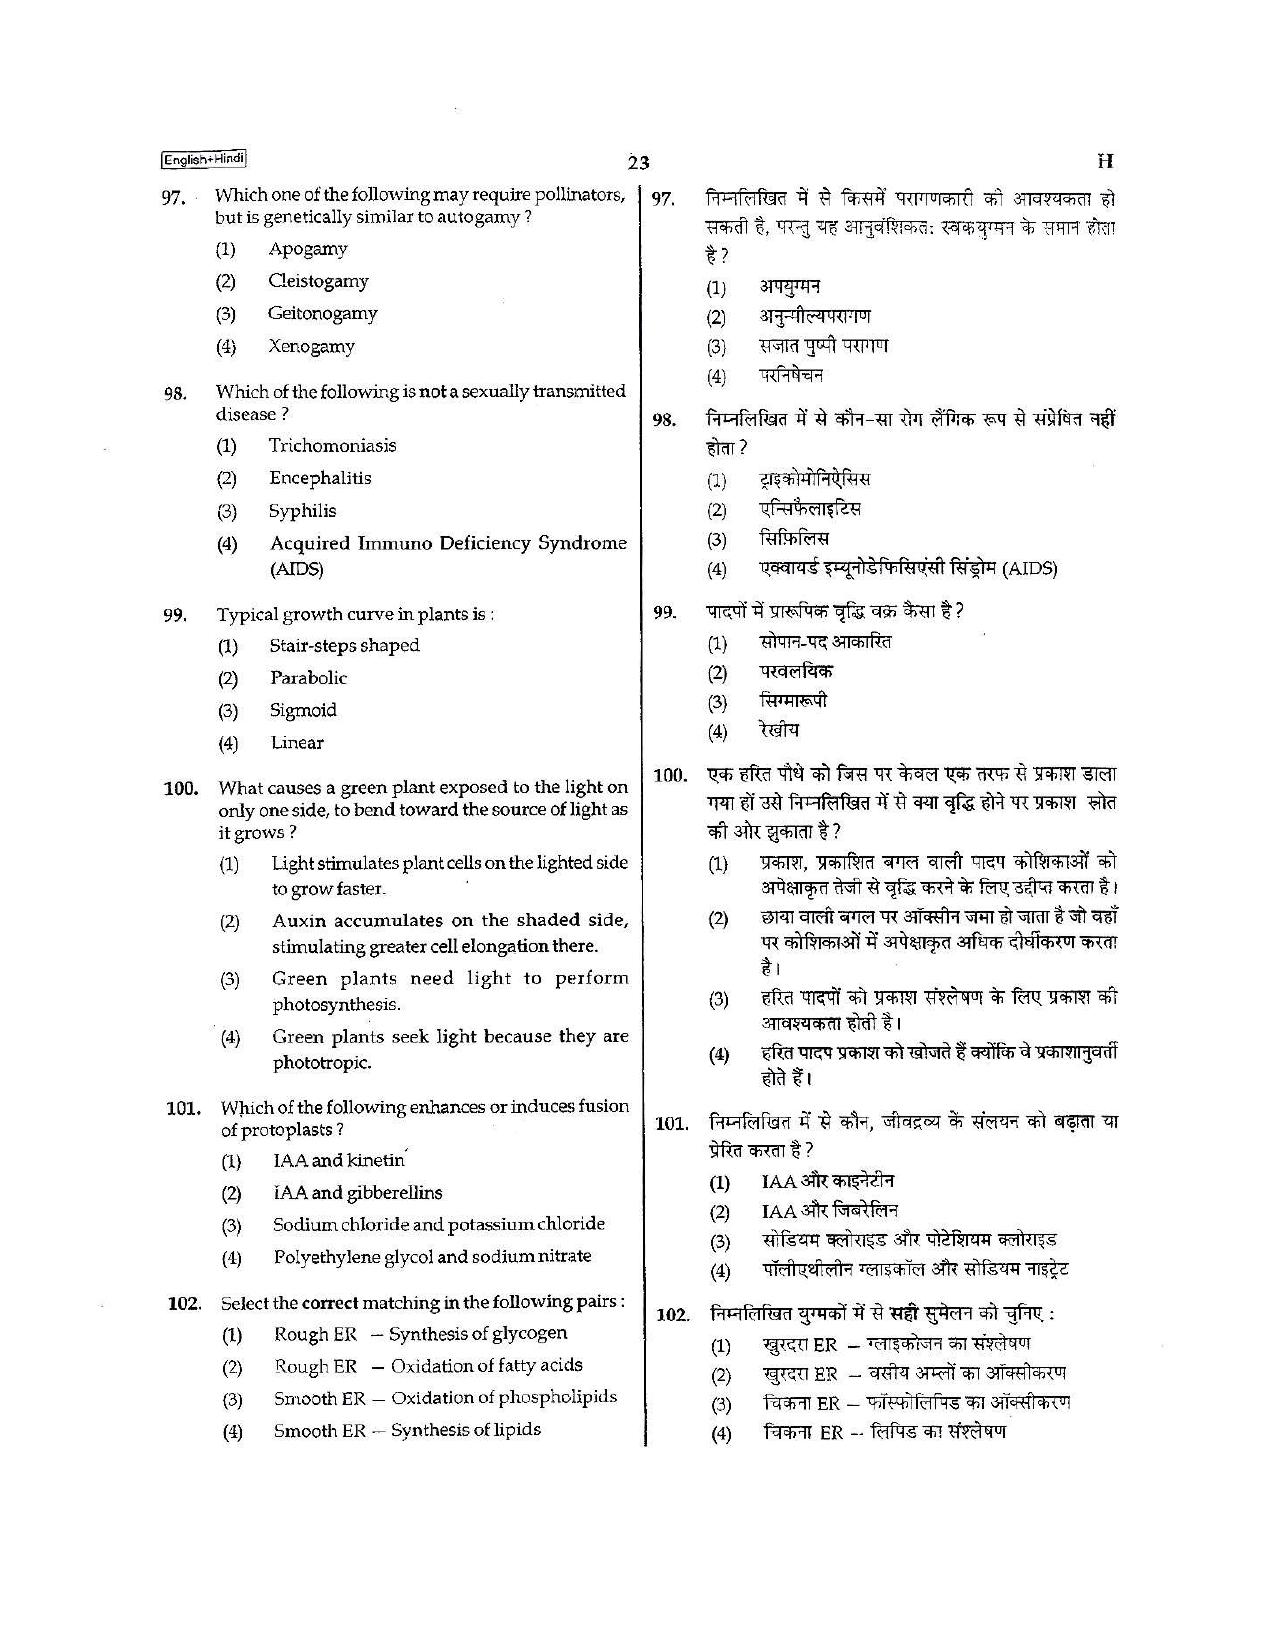 NEET Code H 2015 Question Paper - Page 23